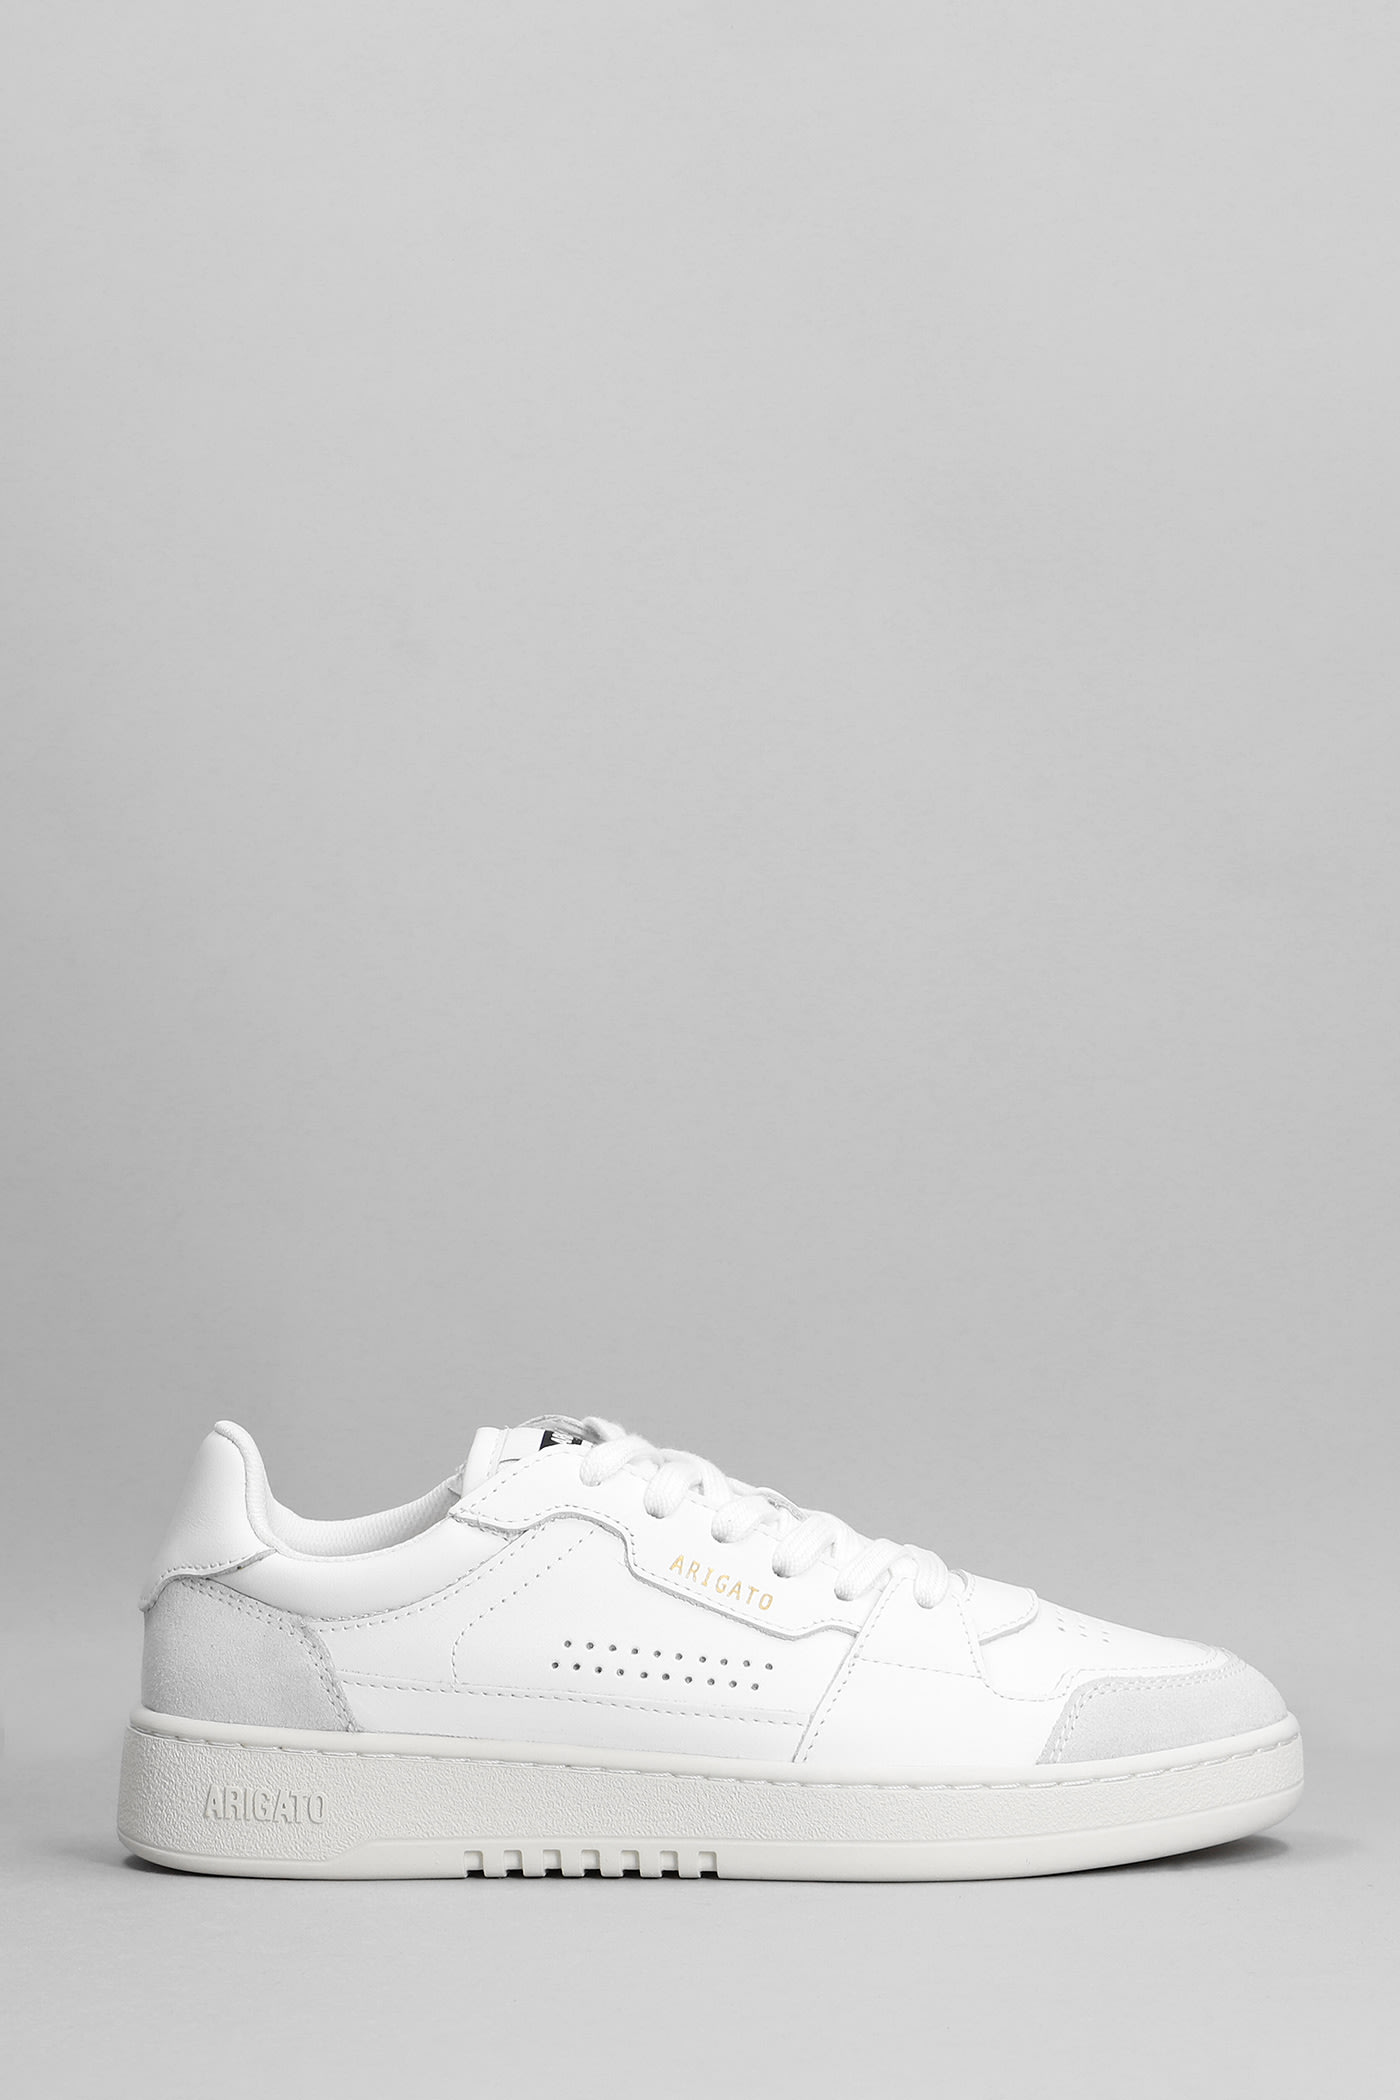 Axel Arigato Dice Lo Sneakers In White Leather